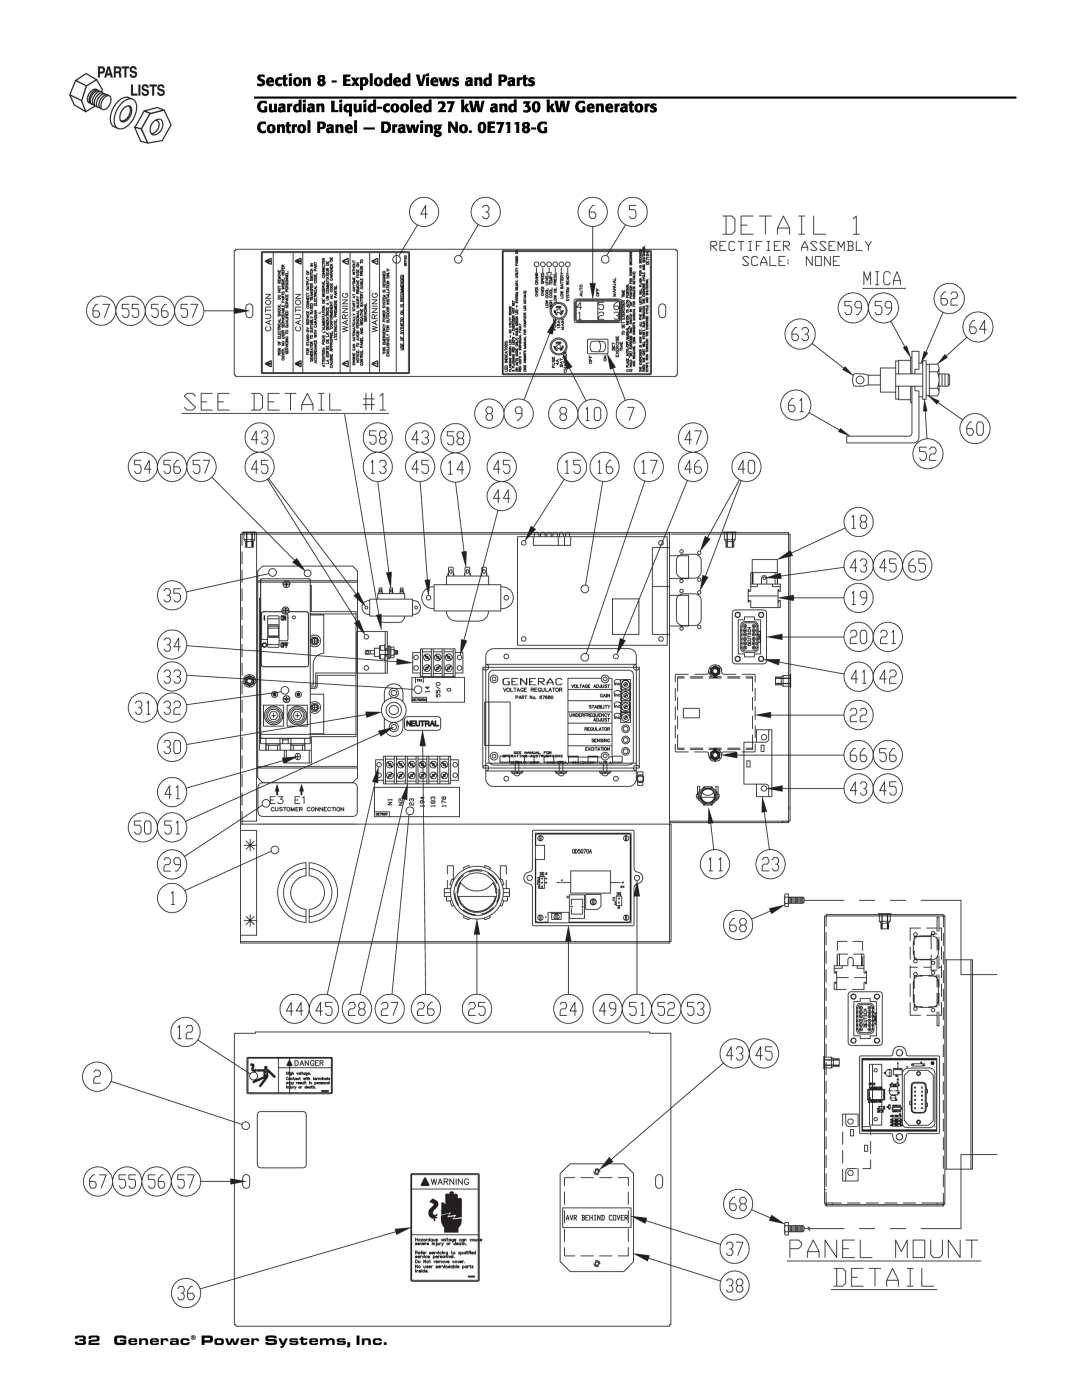 Generac Power Systems 004988-1 owner manual Exploded Views and Parts, Generac Power Systems, Inc 